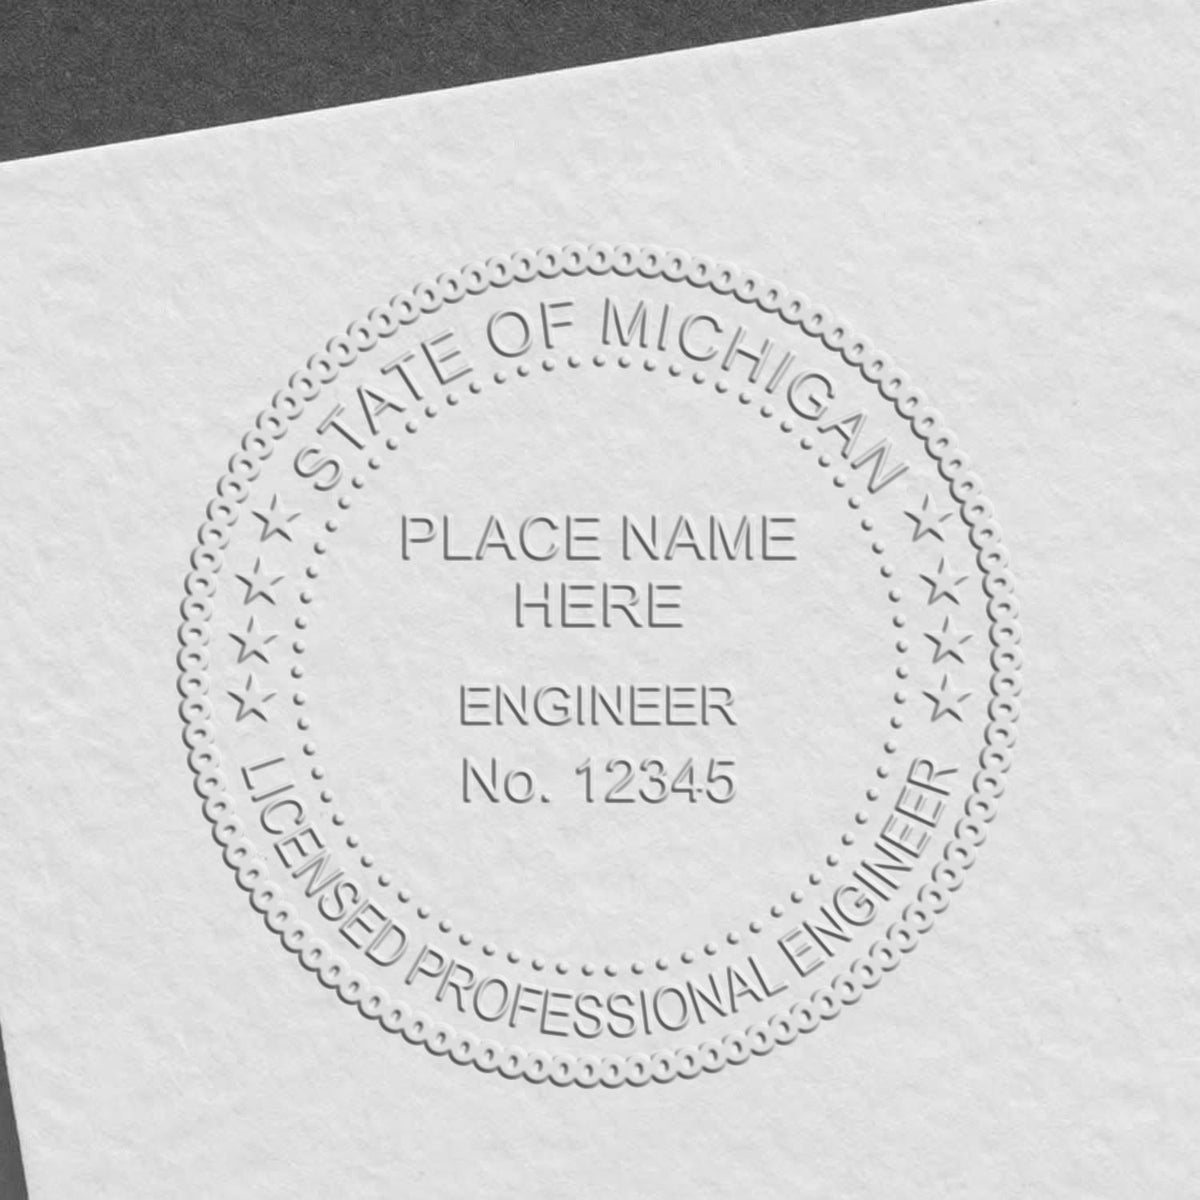 The Gift Michigan Engineer Seal stamp impression comes to life with a crisp, detailed image stamped on paper - showcasing true professional quality.